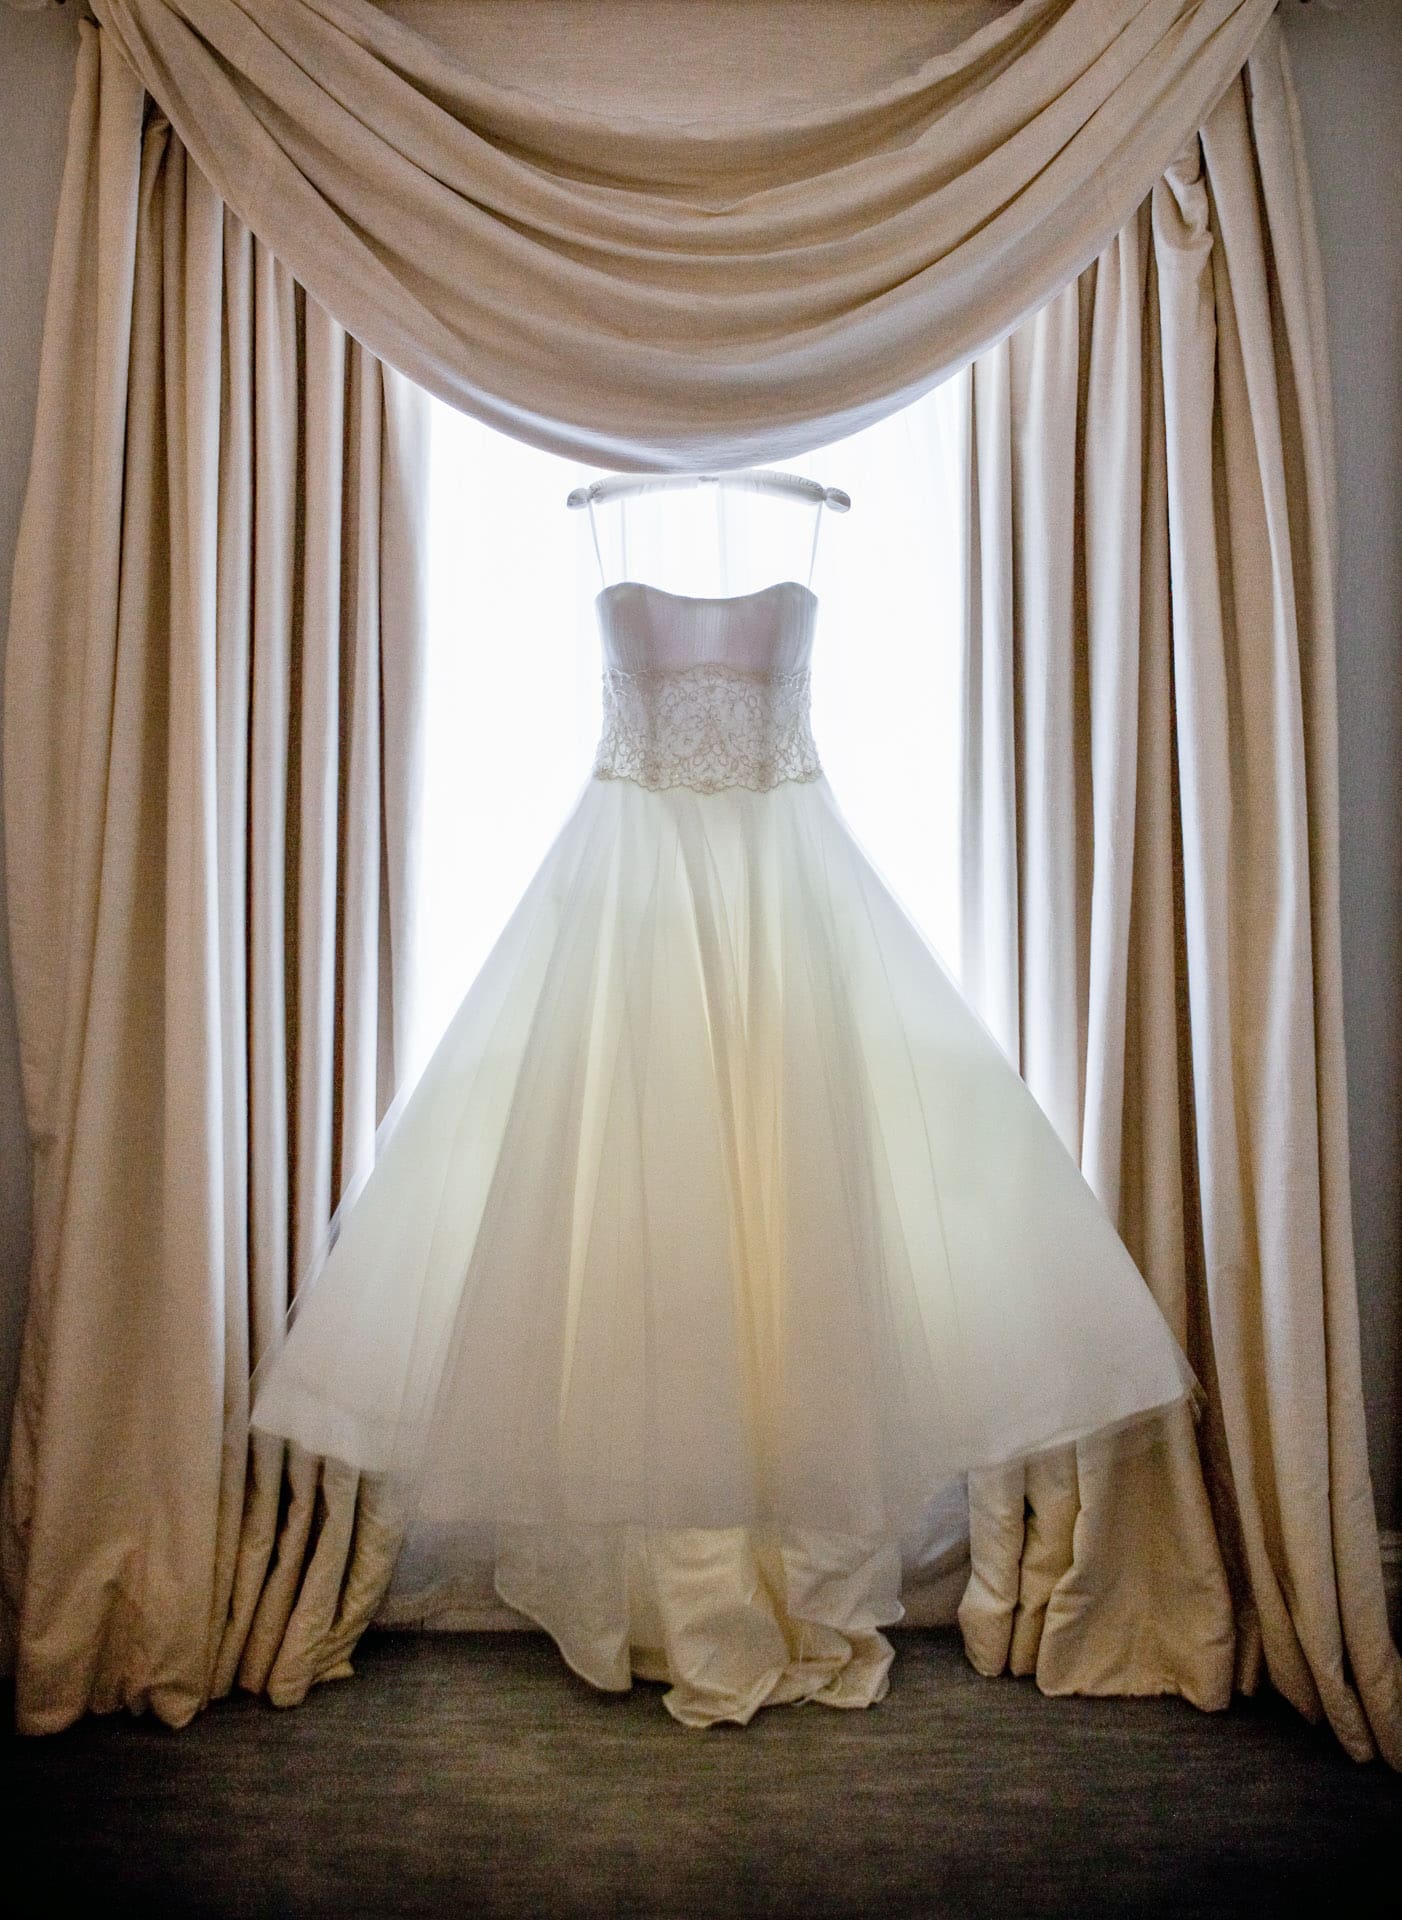 Stunning bridal gown in window